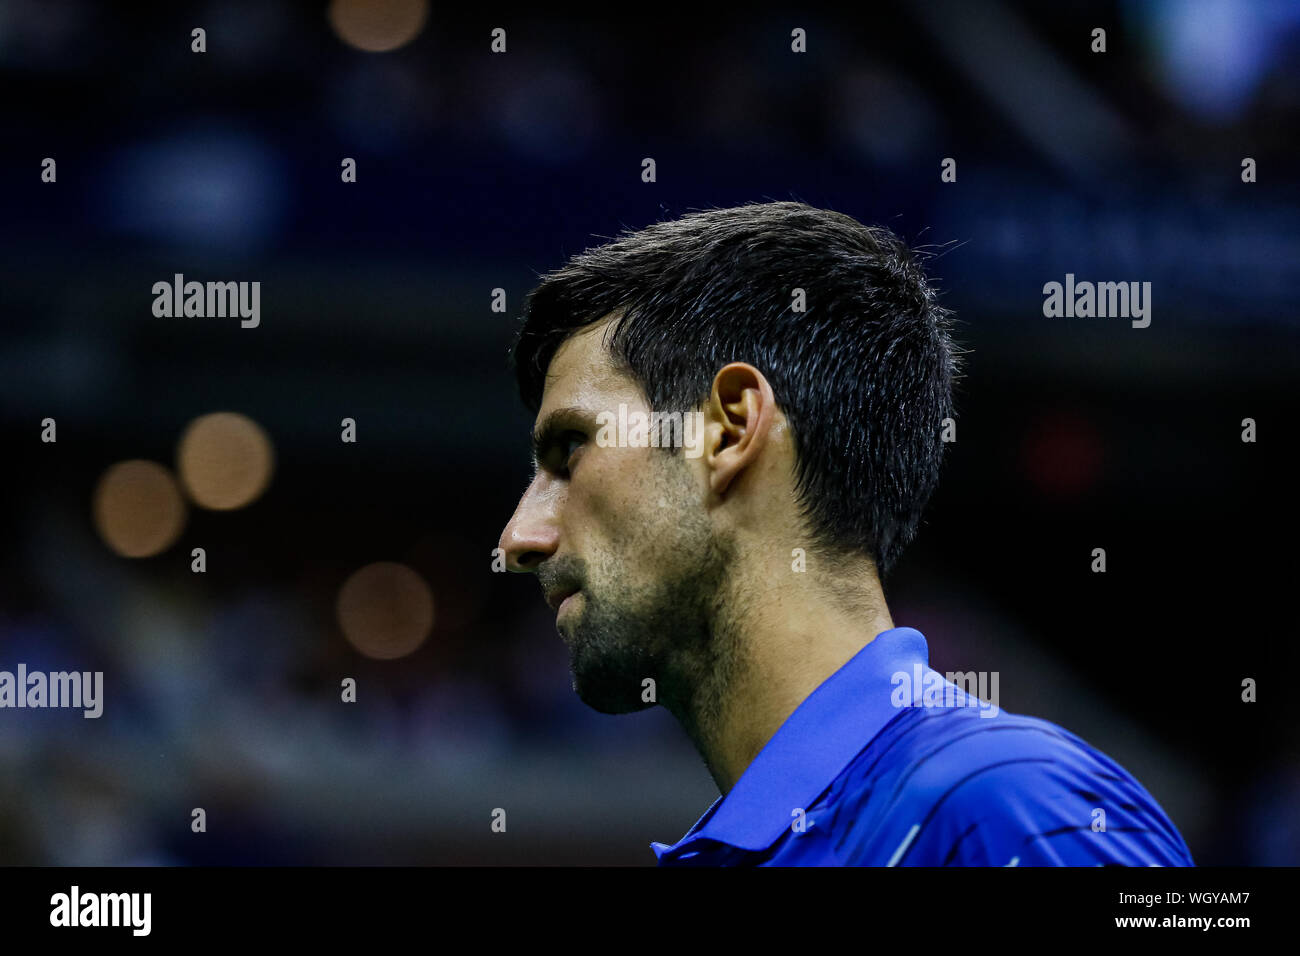 New York, USA. 01st Sep, 2019. Novak Djokovic of Serbia reacts during his match against Stan Wawrinka of Switzerland in the third round on Arthur Ashe Stadium at the USTA Billie Jean King National Tennis Center on September 01, 2019 in New York City. Credit: Independent Photo Agency/Alamy Live News Stock Photo